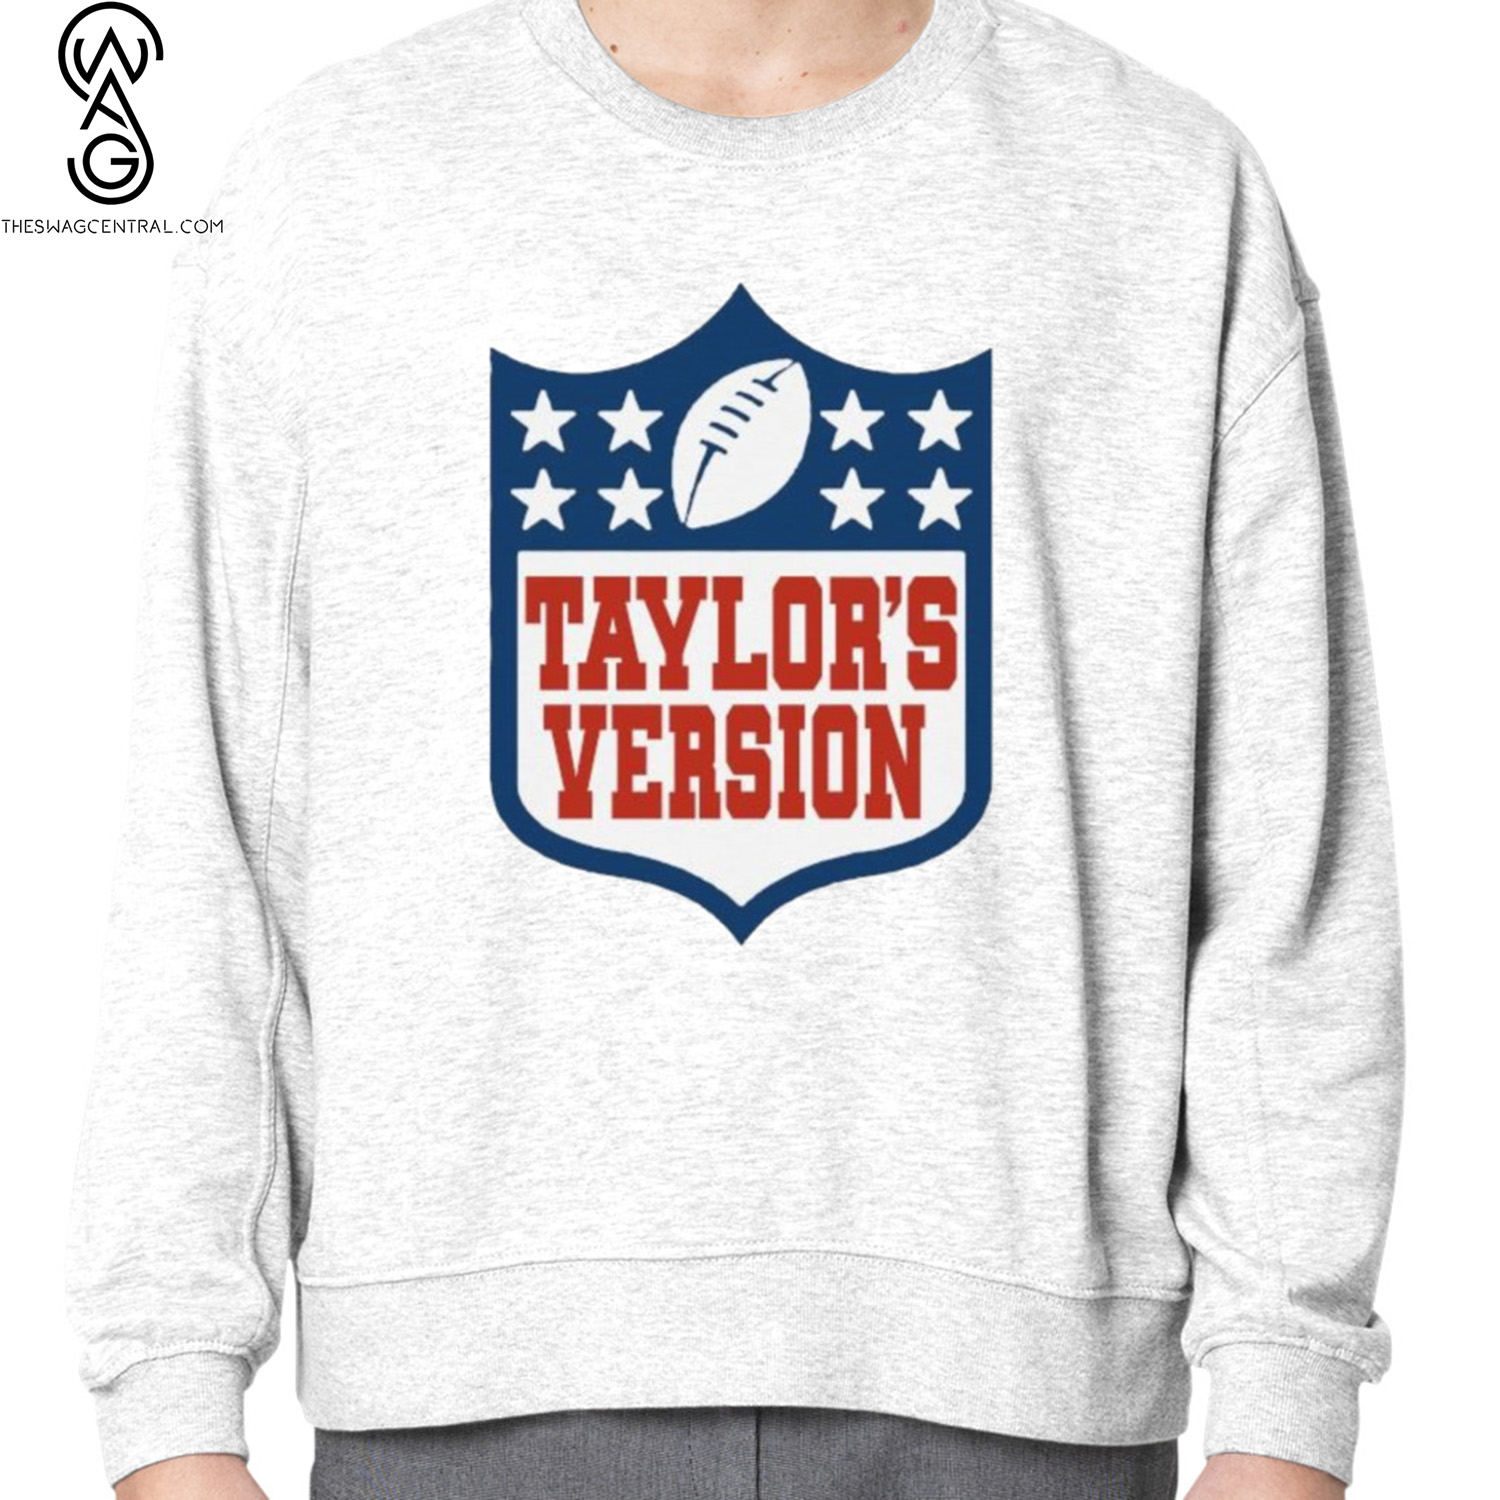 Taylor Swift's 'Open Invitation' and Taylor's Version NFL Sweatshirt A Perfect Blend of Music and Sports Fandom